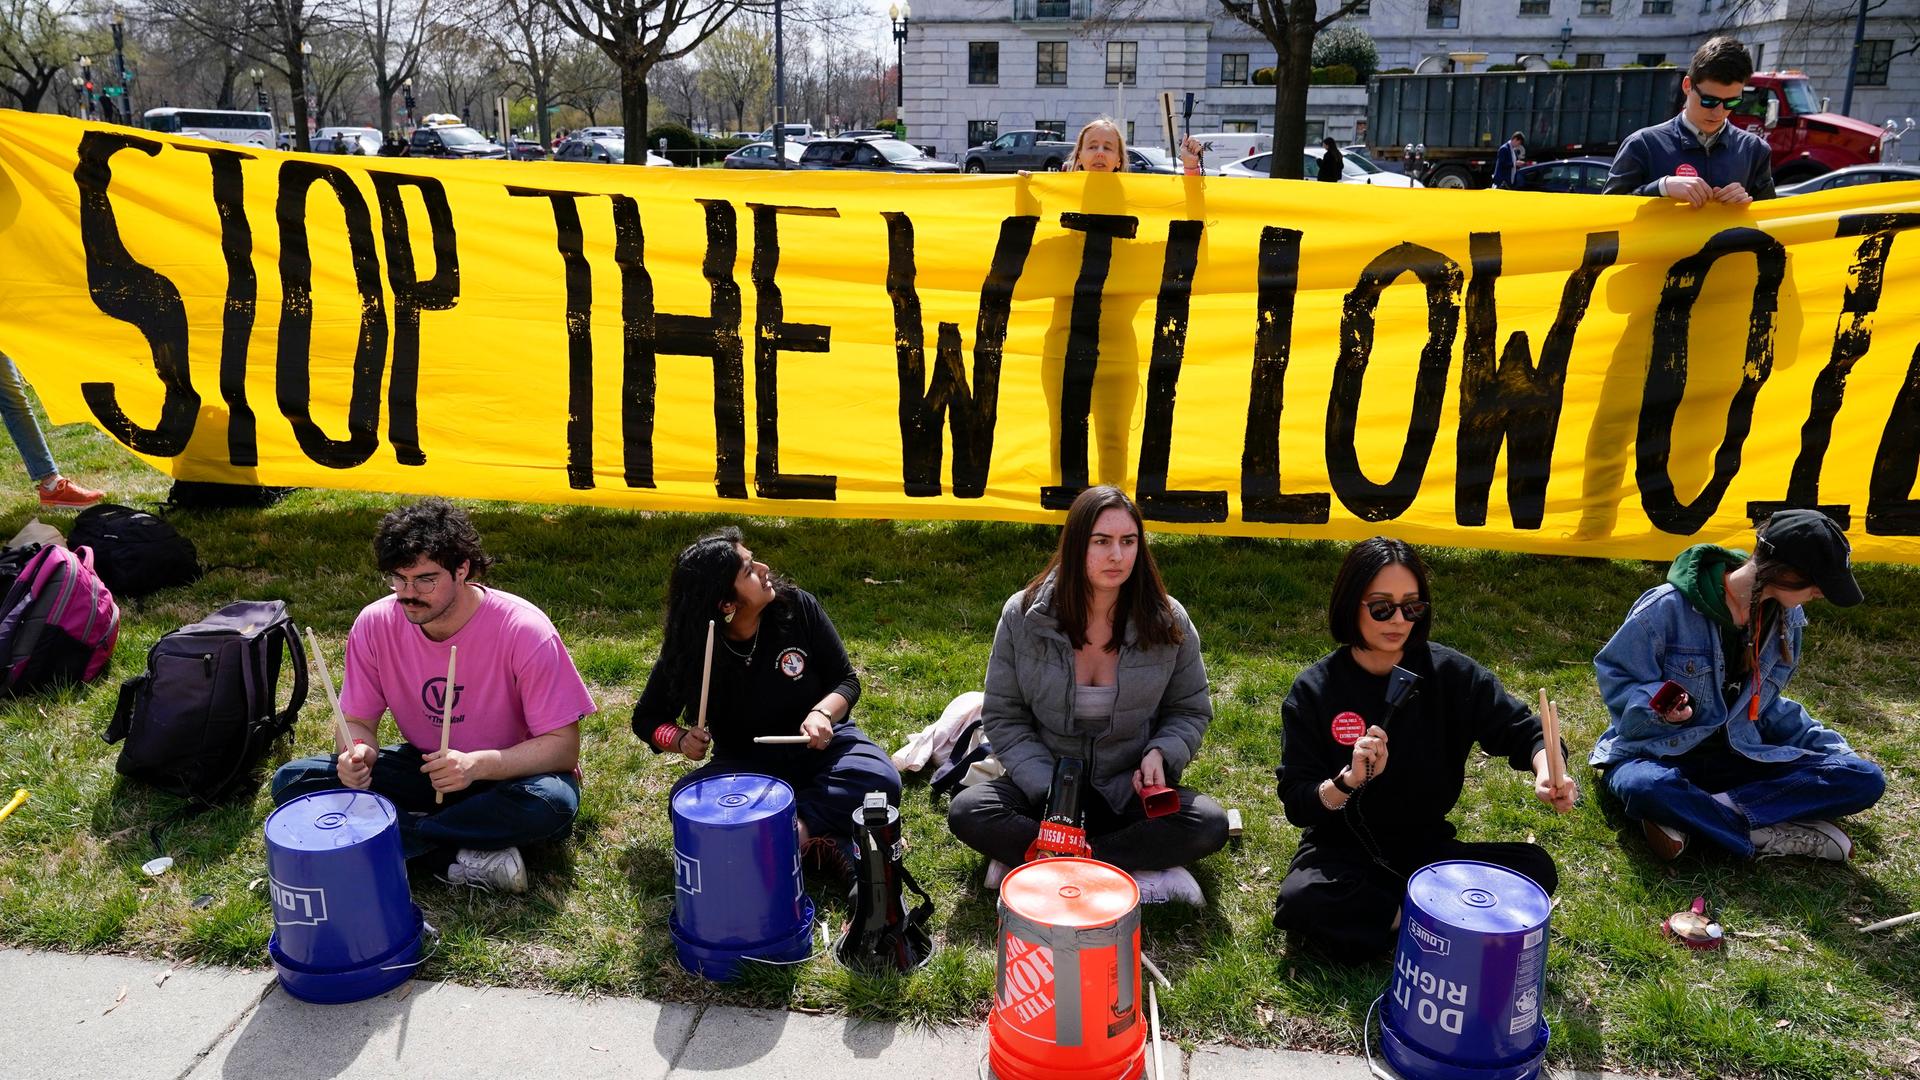 Oil drilling in Alaska – The protest against the Willow project in the US is also growing in Germany